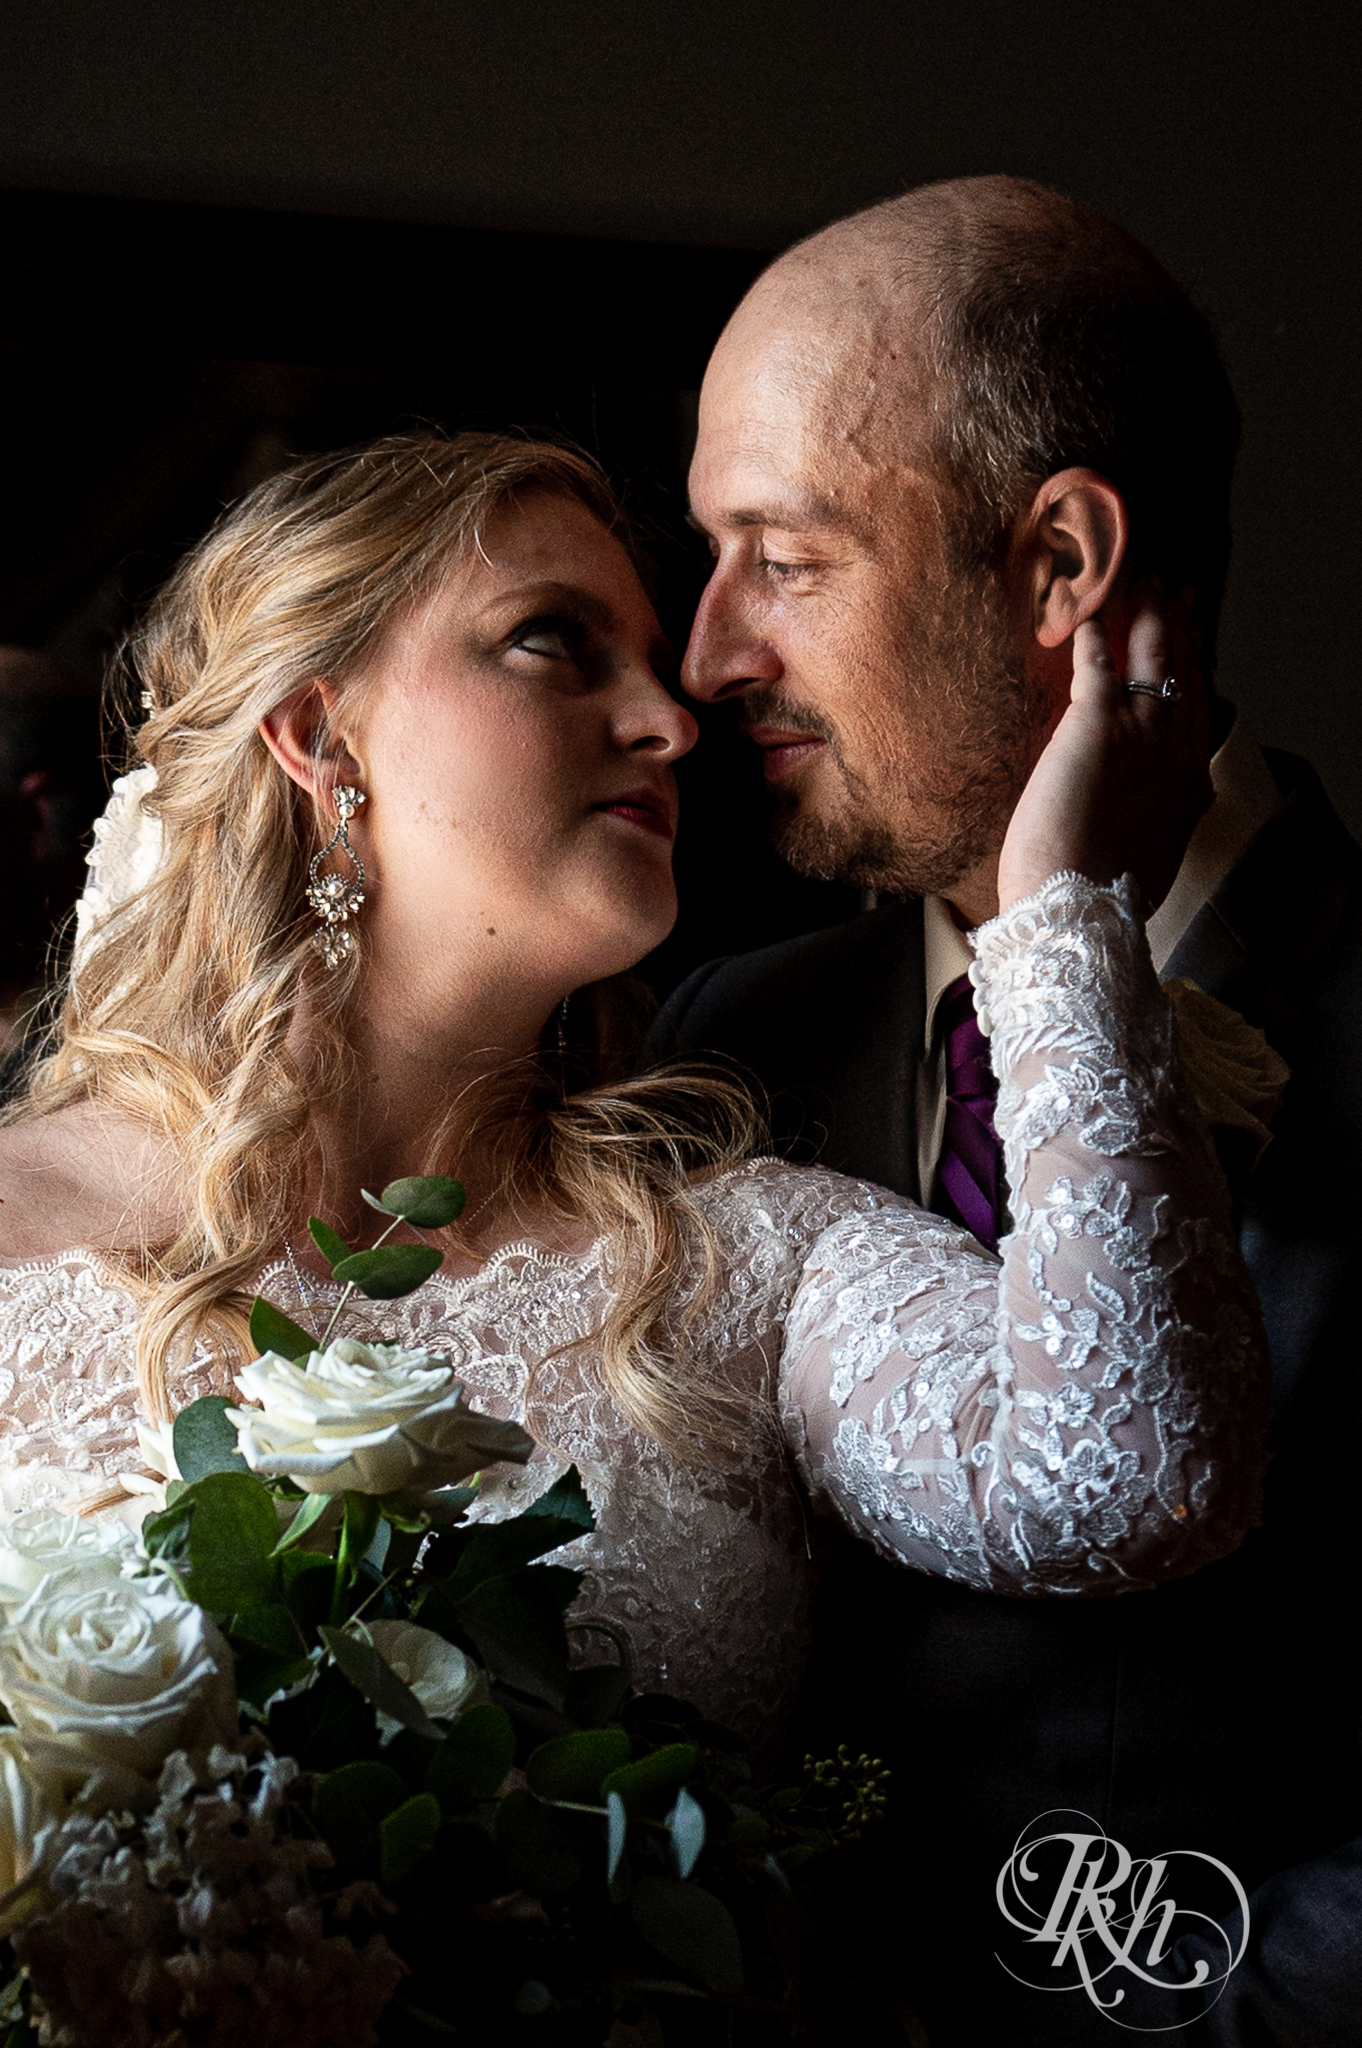 Bride and groom kiss at Weddings at the Broz in New Prague, Minnesota.